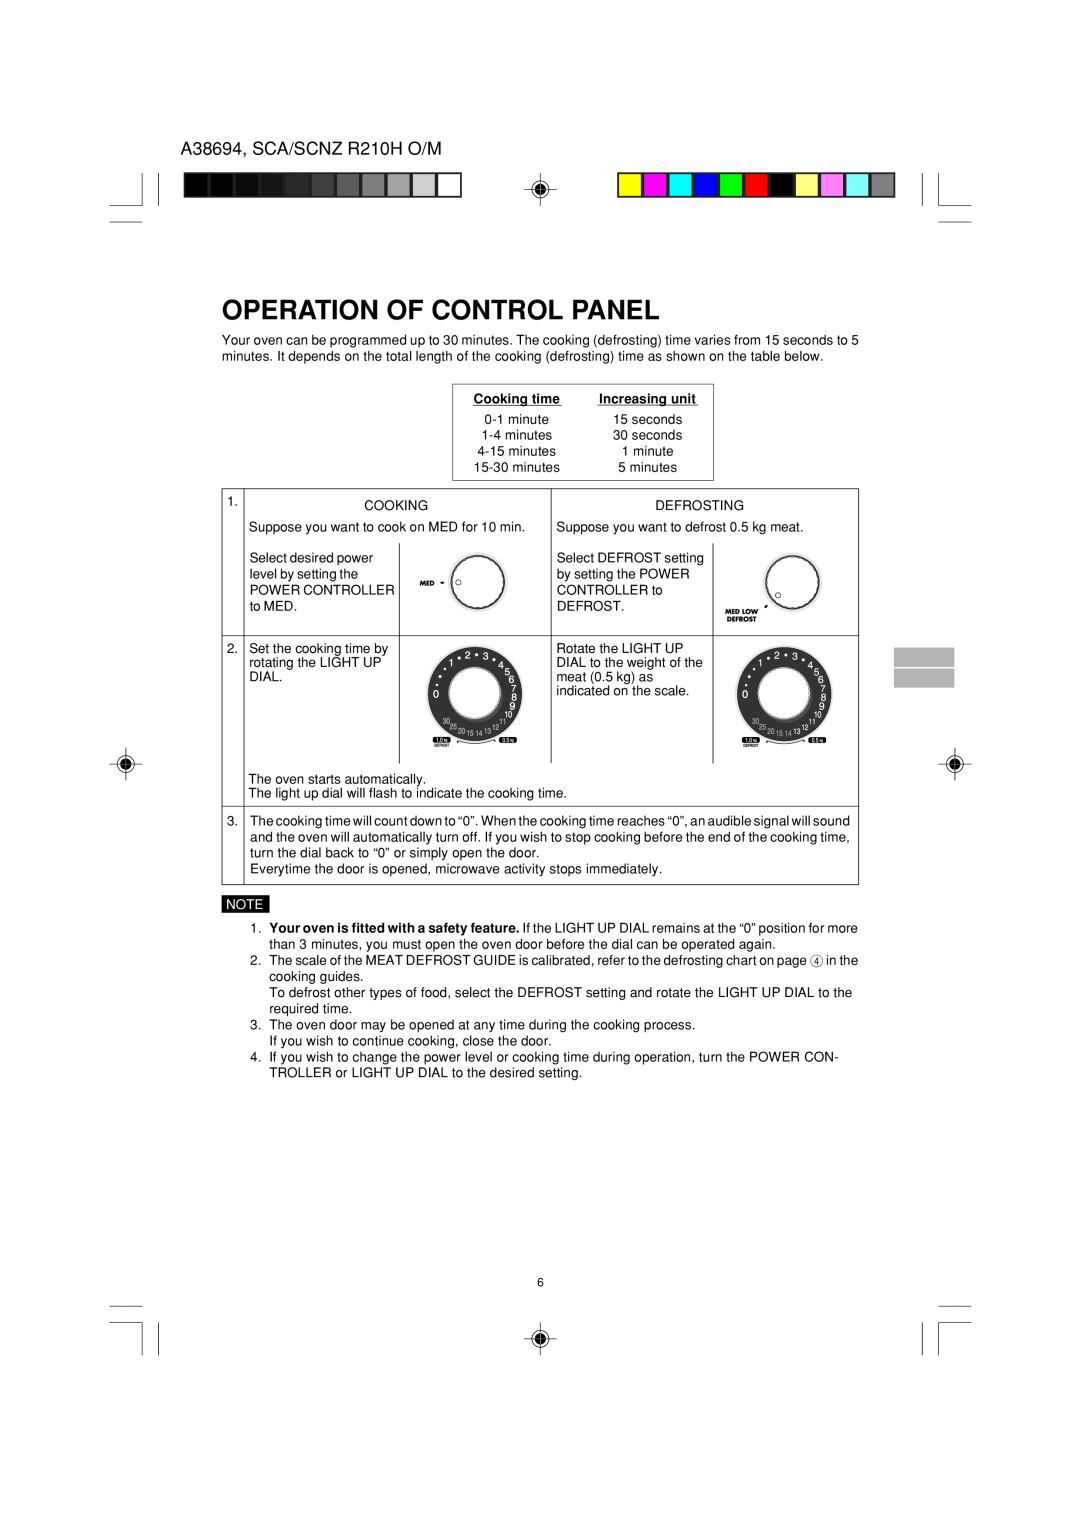 Sharp R-210H operation manual Operation Of Control Panel, A38694, SCA/SCNZ R210H O/M, Cooking time, Increasing unit 